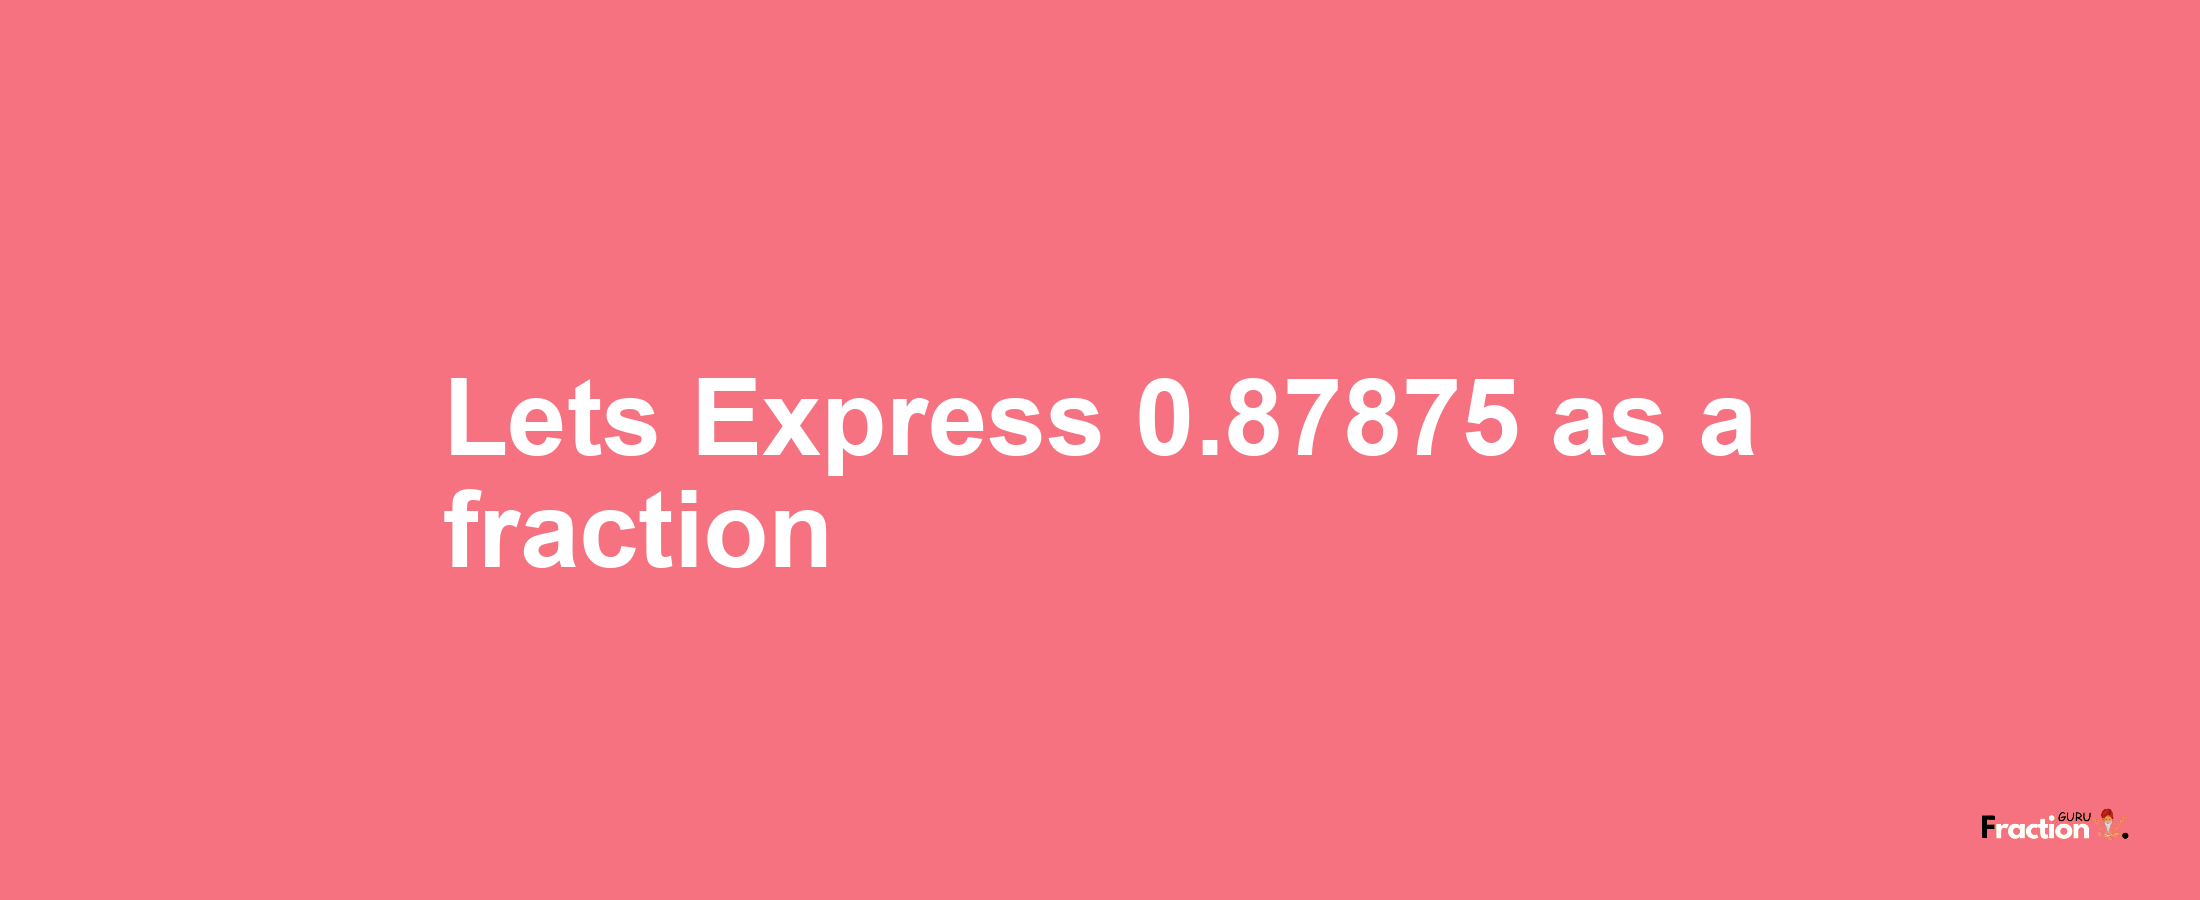 Lets Express 0.87875 as afraction